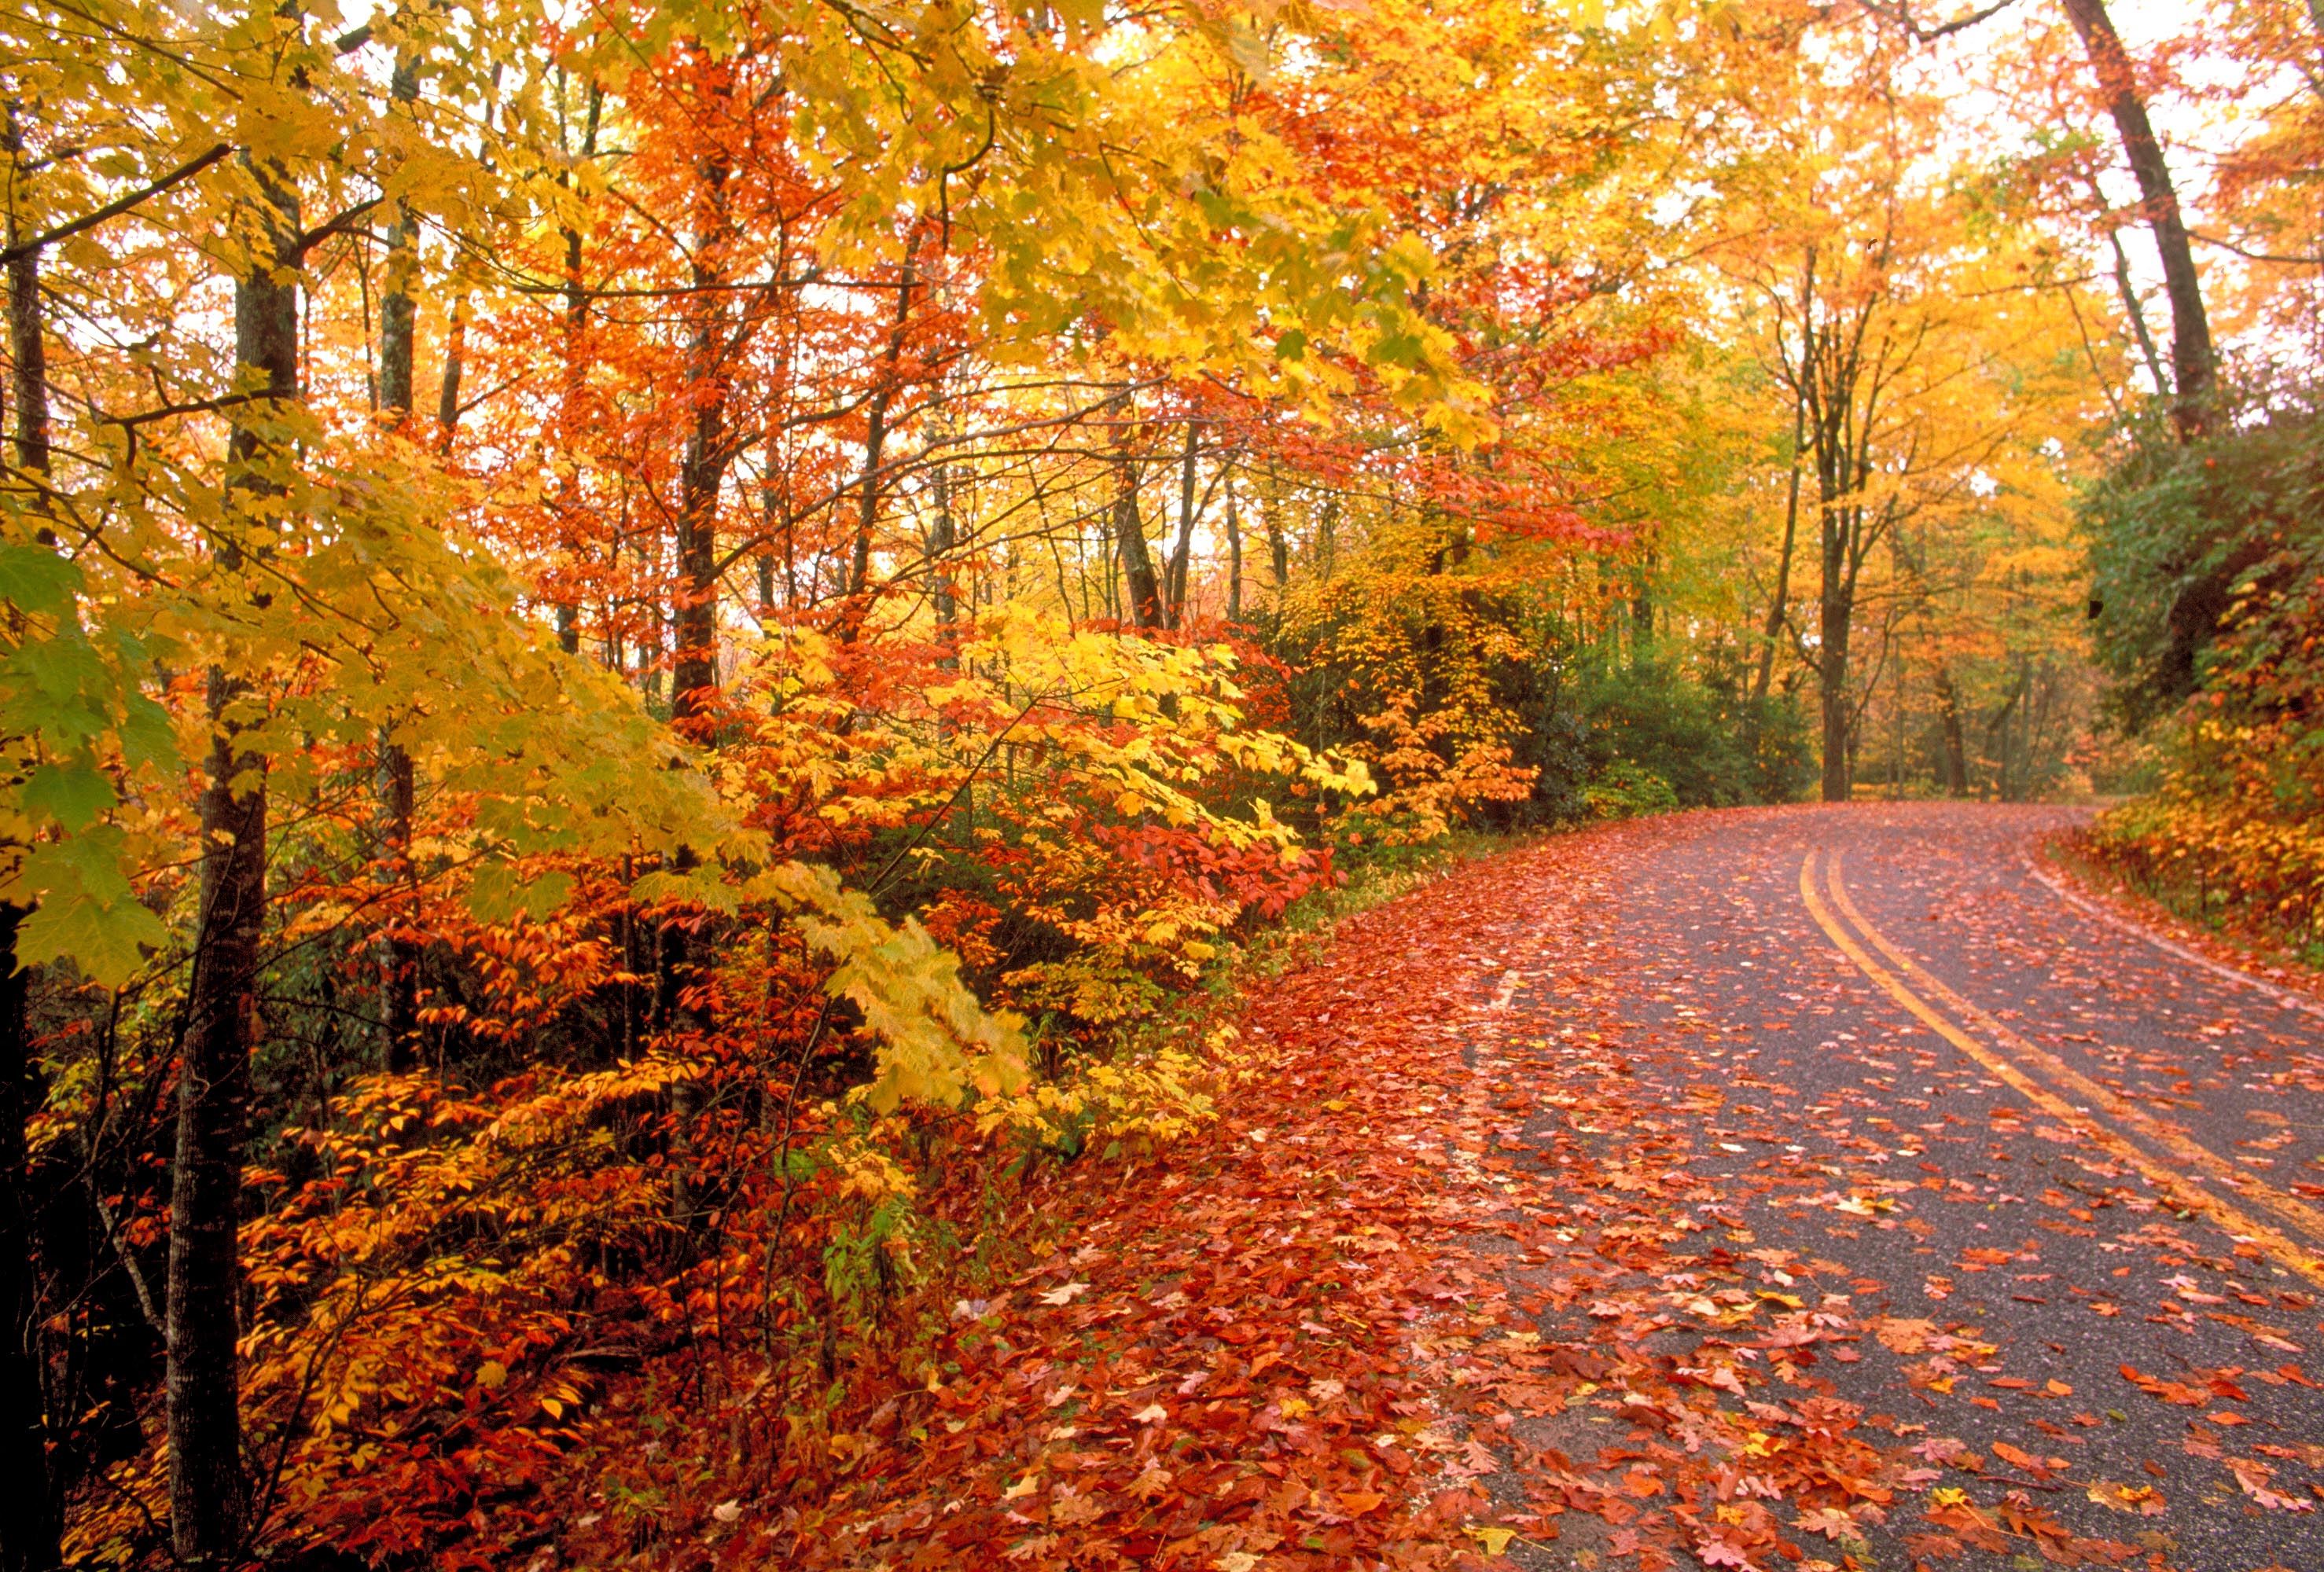 When does fall start? According to astronomers, the first day of fall begins on the Autumnal Equinox, which is September 22.